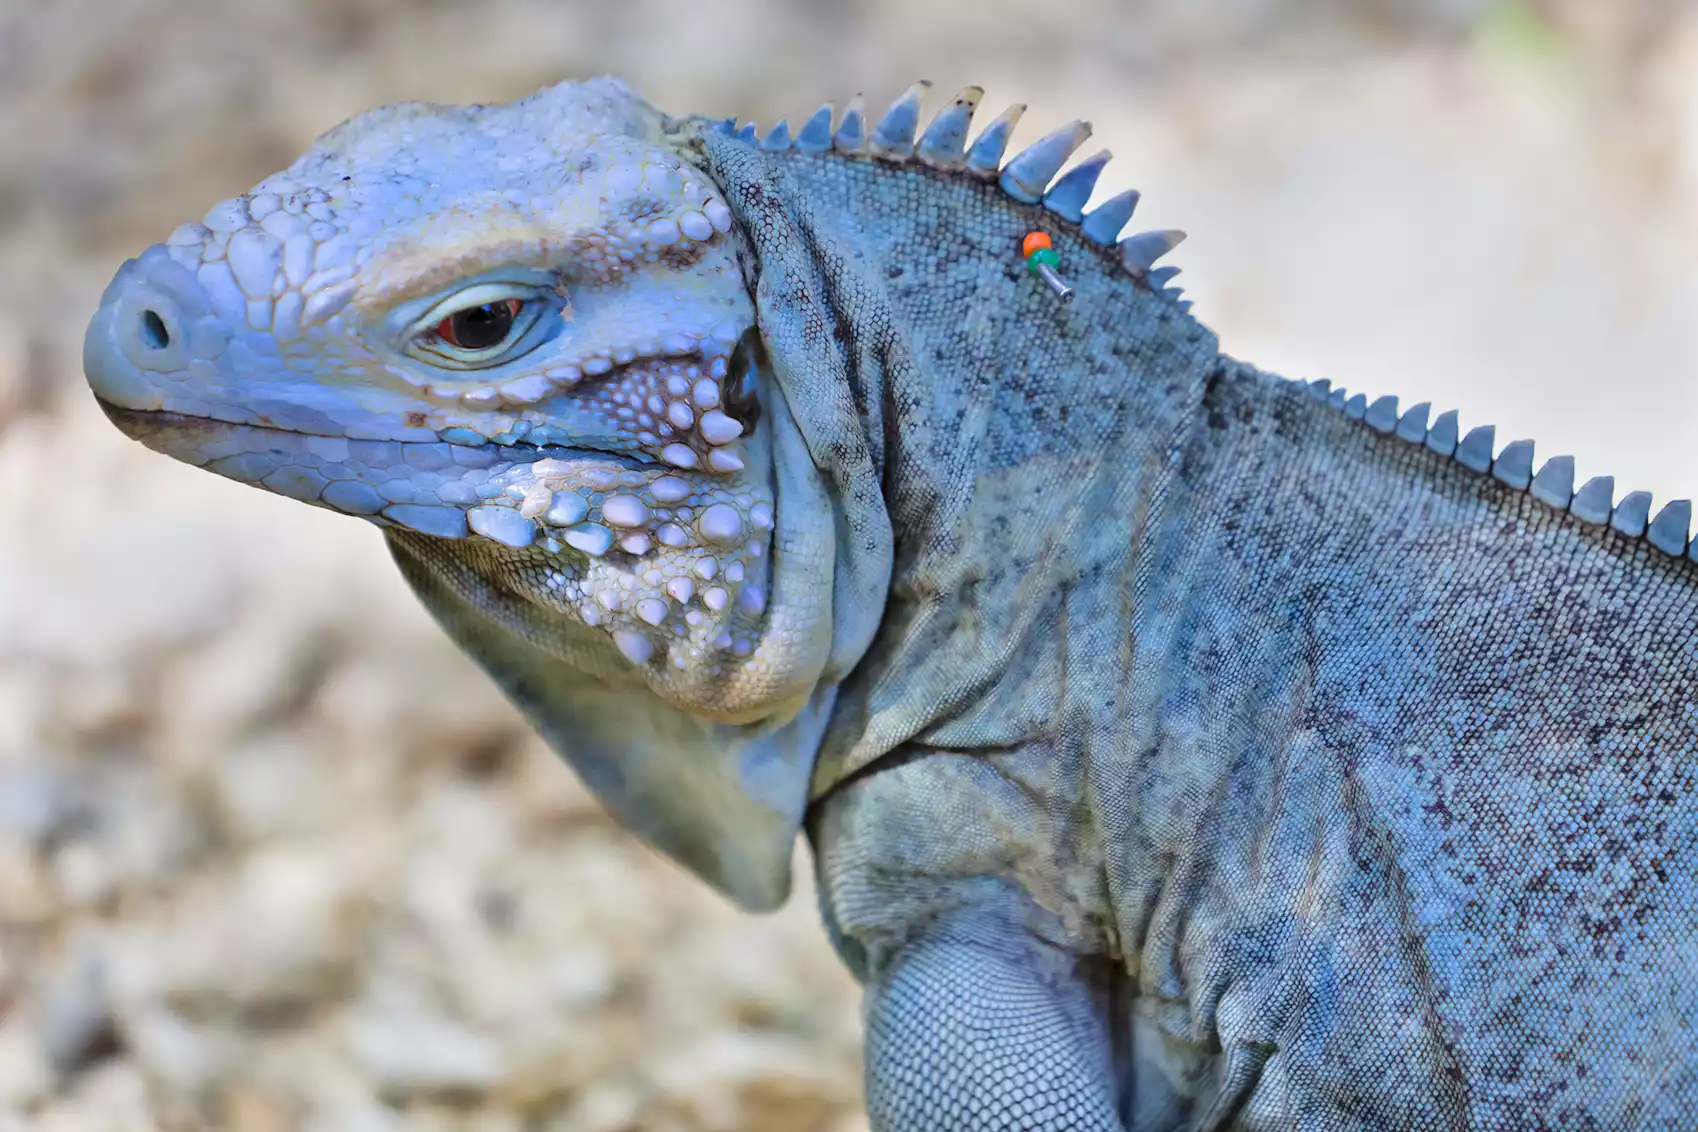 A blue iguana standing against a background of rocky terrain